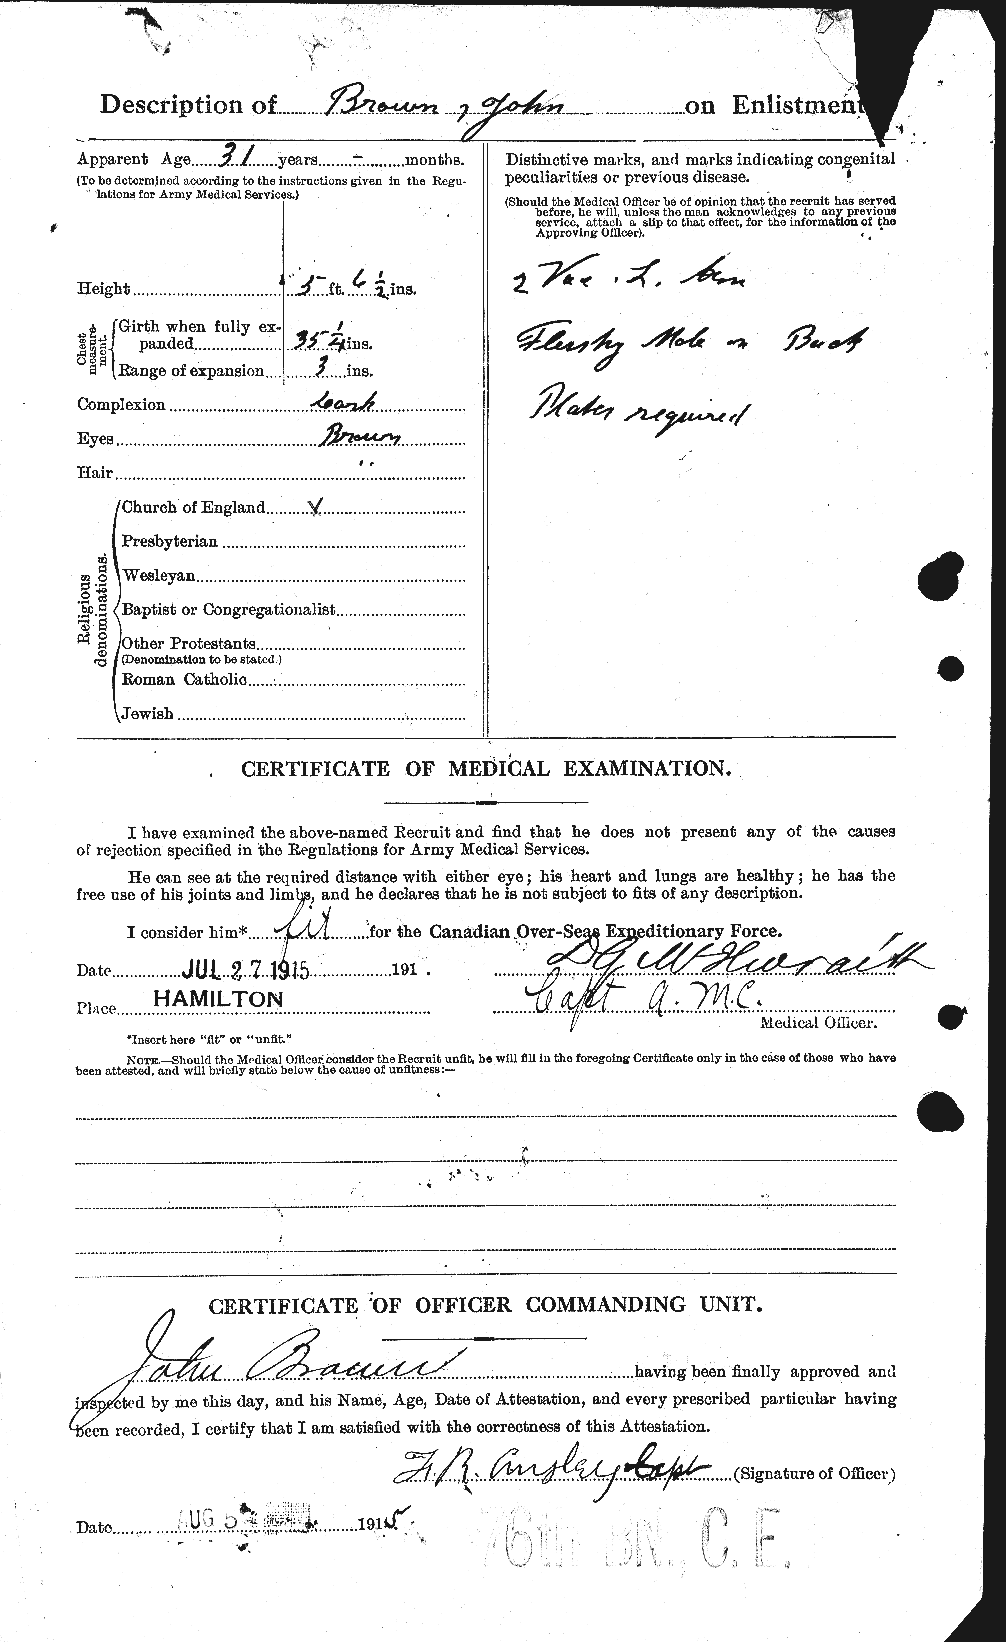 Personnel Records of the First World War - CEF 263887b